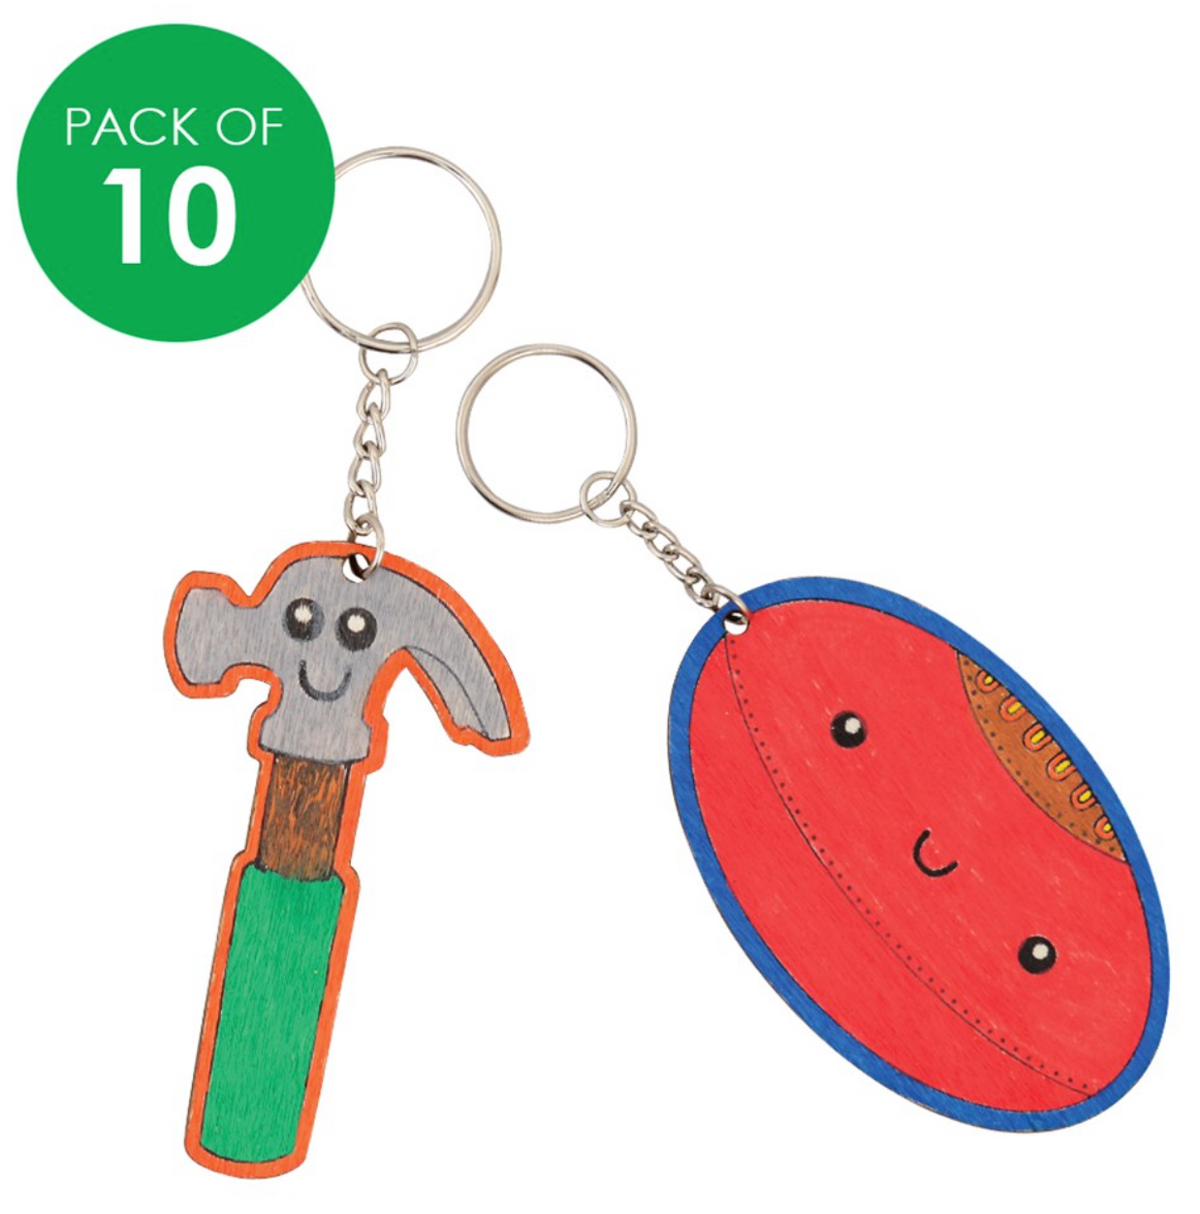 Printed Wooden Keyrings Fathers Day Pack of 10